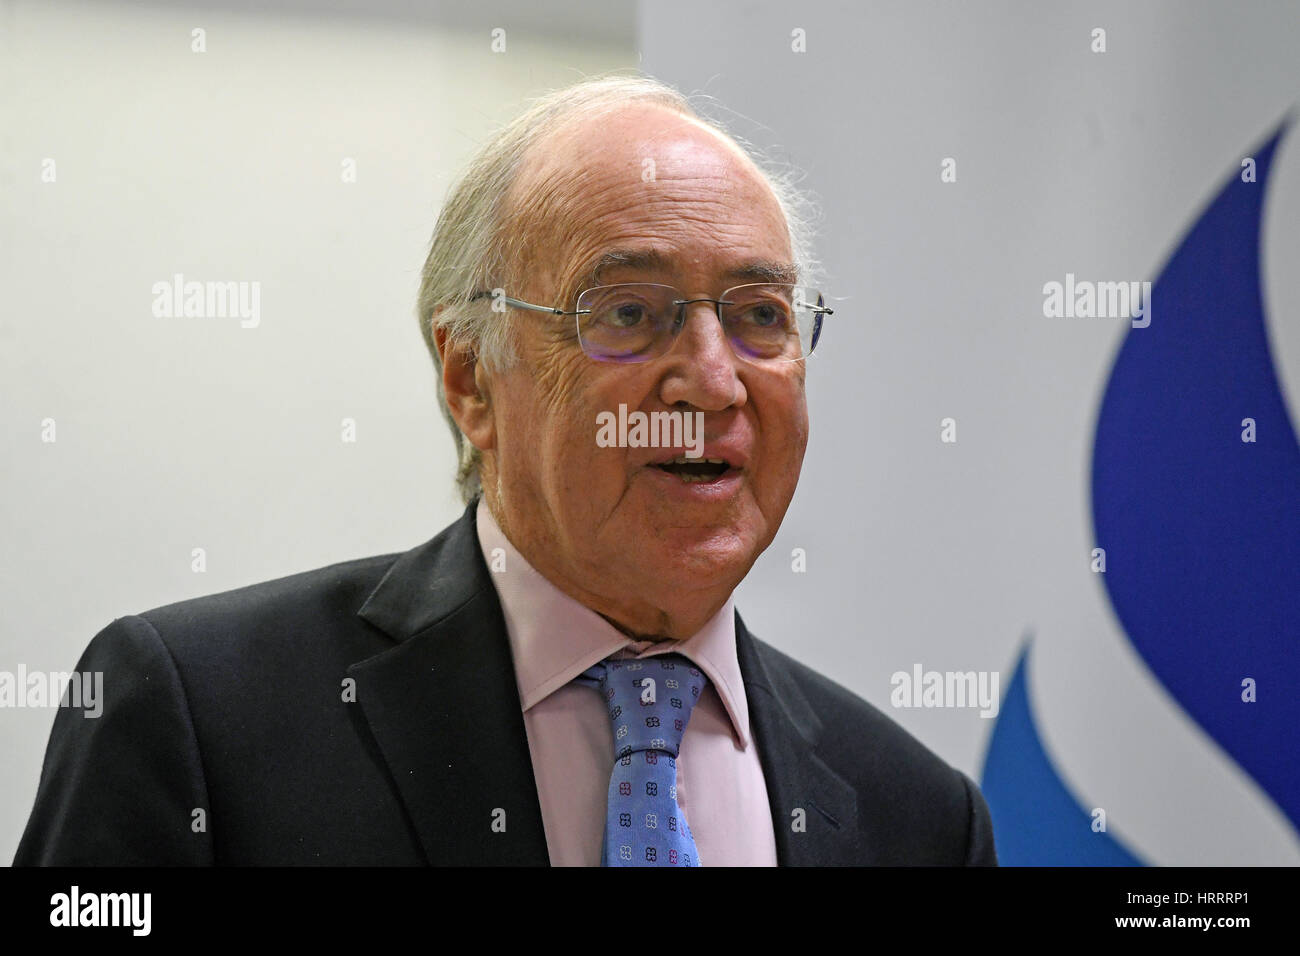 Lord Michael Howard during a Brexit and the Future conference at the BPP University in central London. Stock Photo